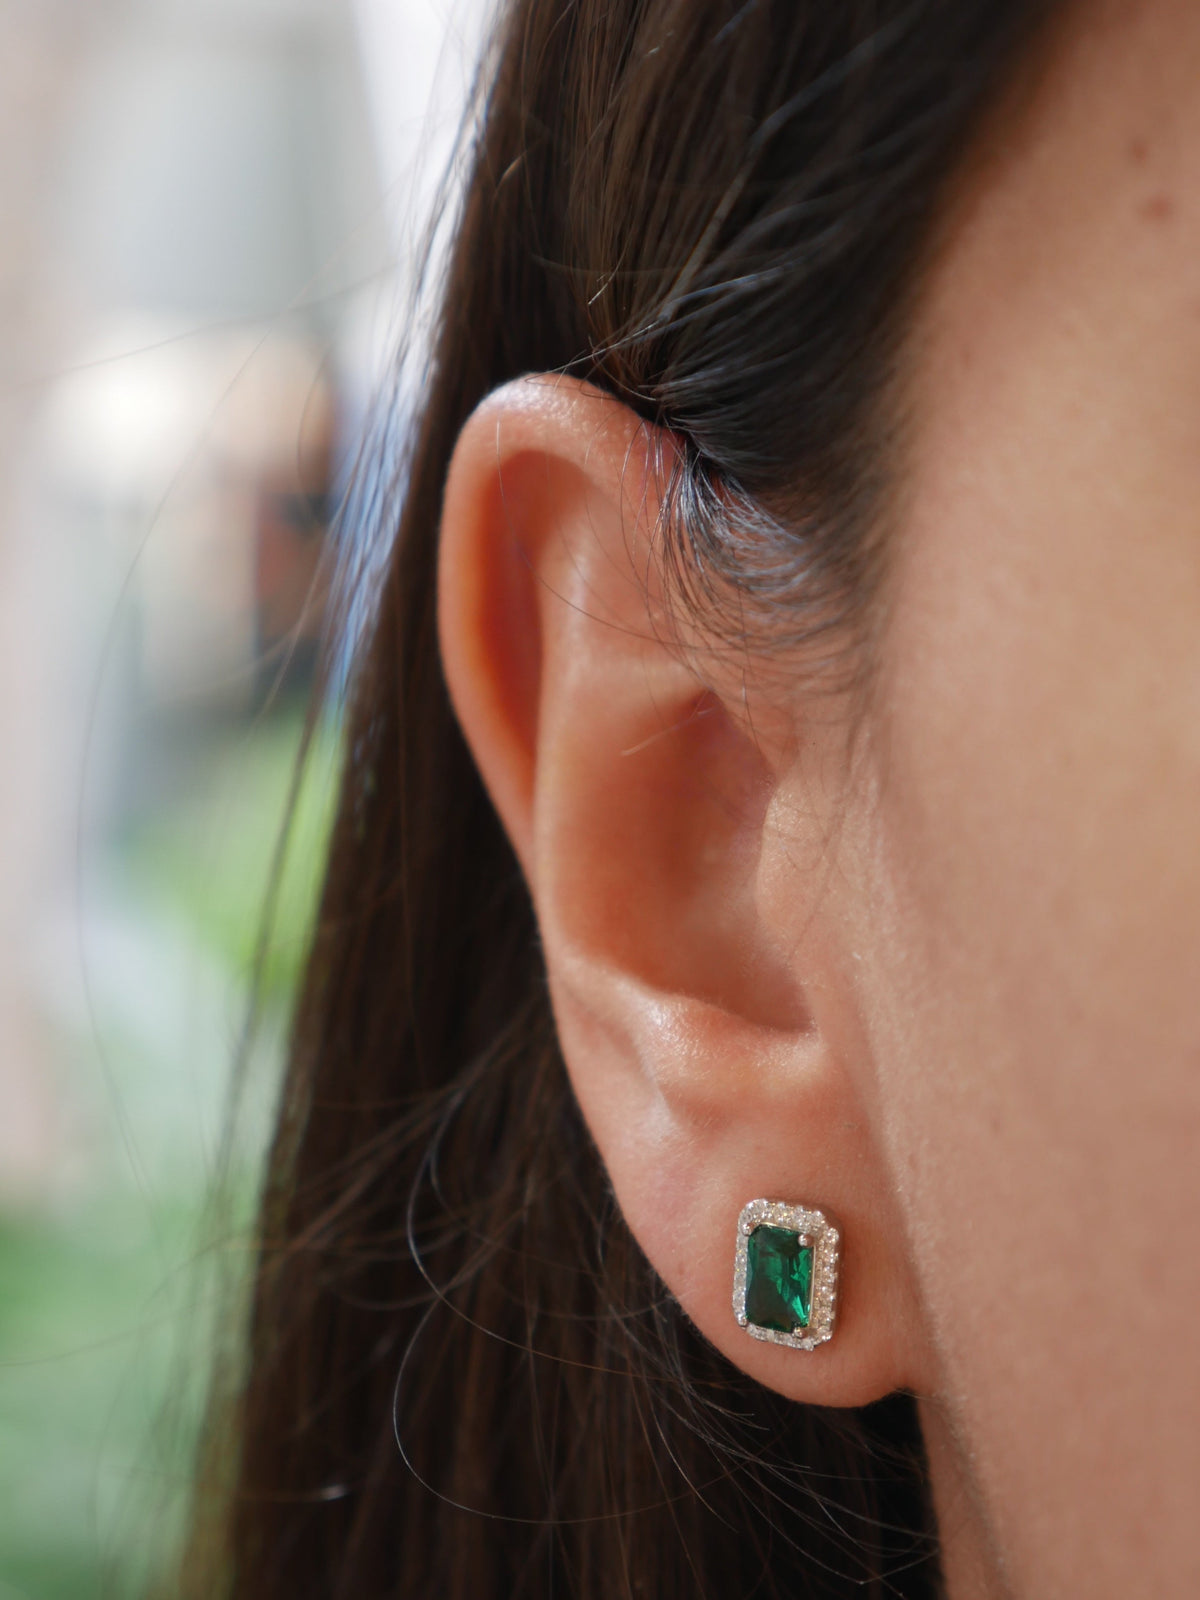 earrings, stud earrings, gold earrings, hypoallergenic, fashion jewelry, merald green stud earrings green and silver studs rectangle emerald cut for men and woman waterproof dainty hypoallergenic, unique cute and popular trending stud earrings classic for everyday wont tarnish or turn green instagram influencer earrings jewelry store Miami Brickell gift ideas Kesley Boutique 